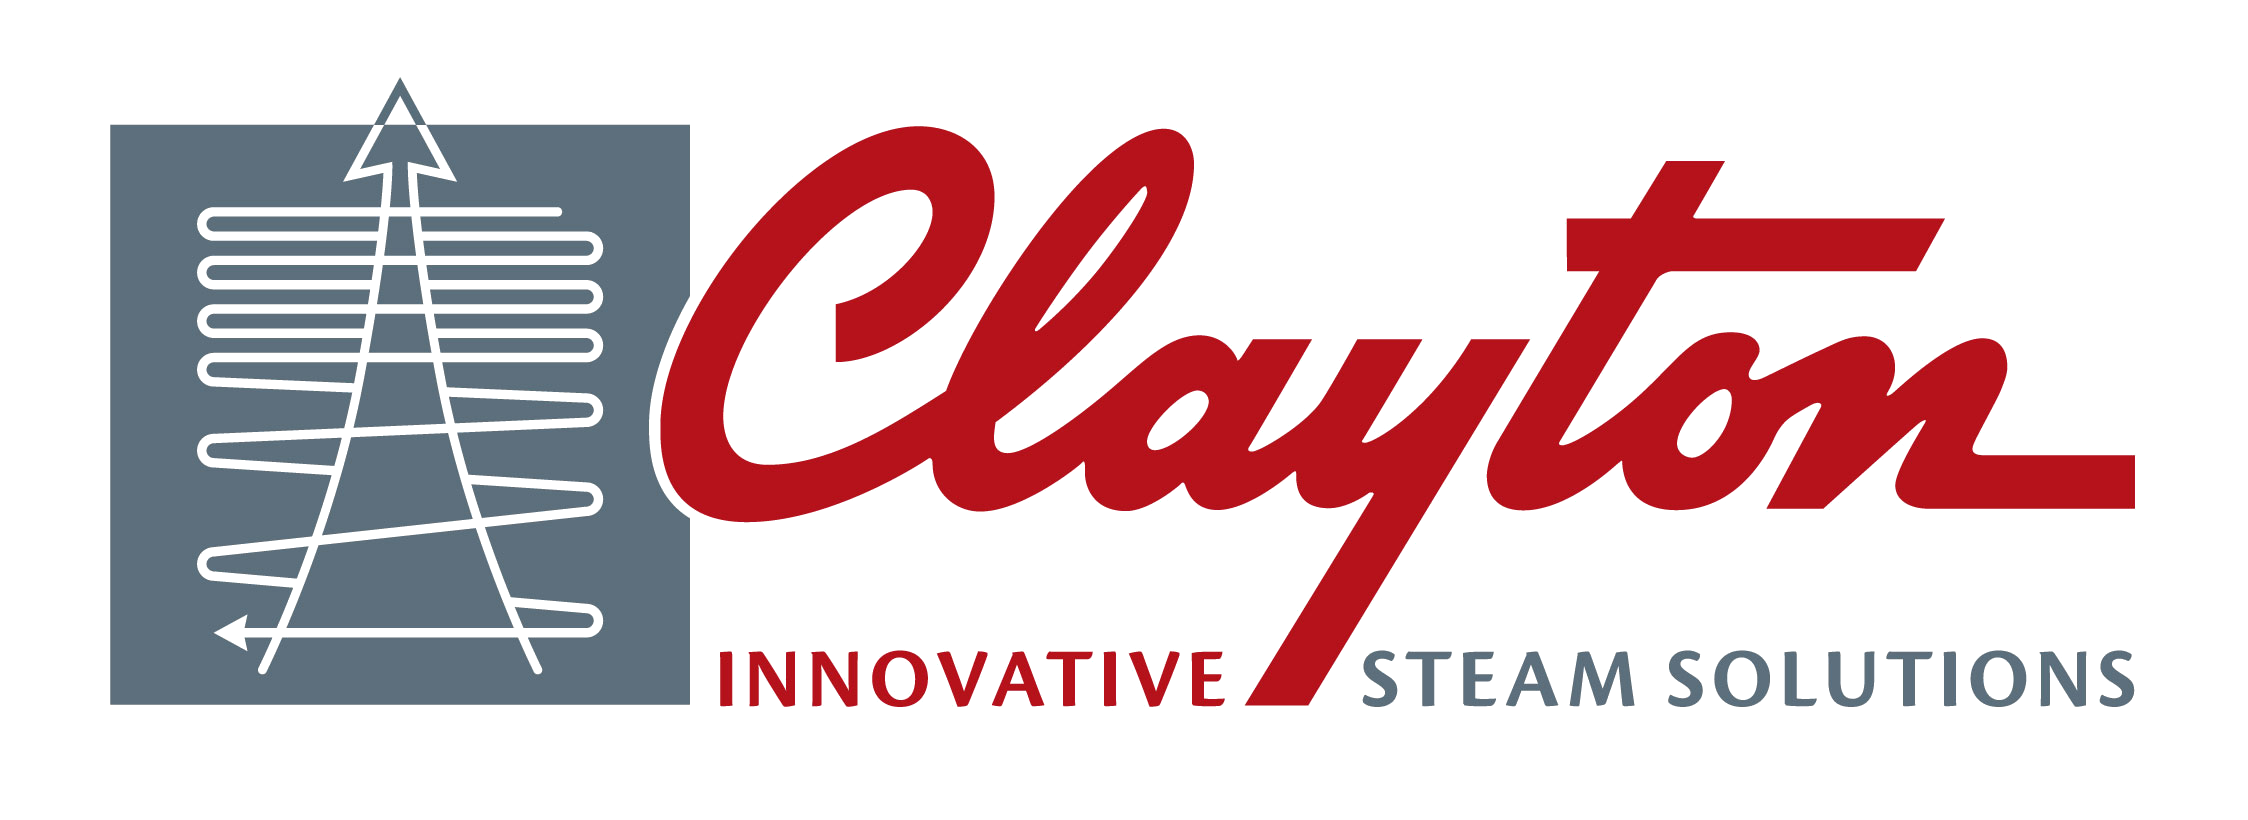 Clayton steam solutions logo white and red-clear